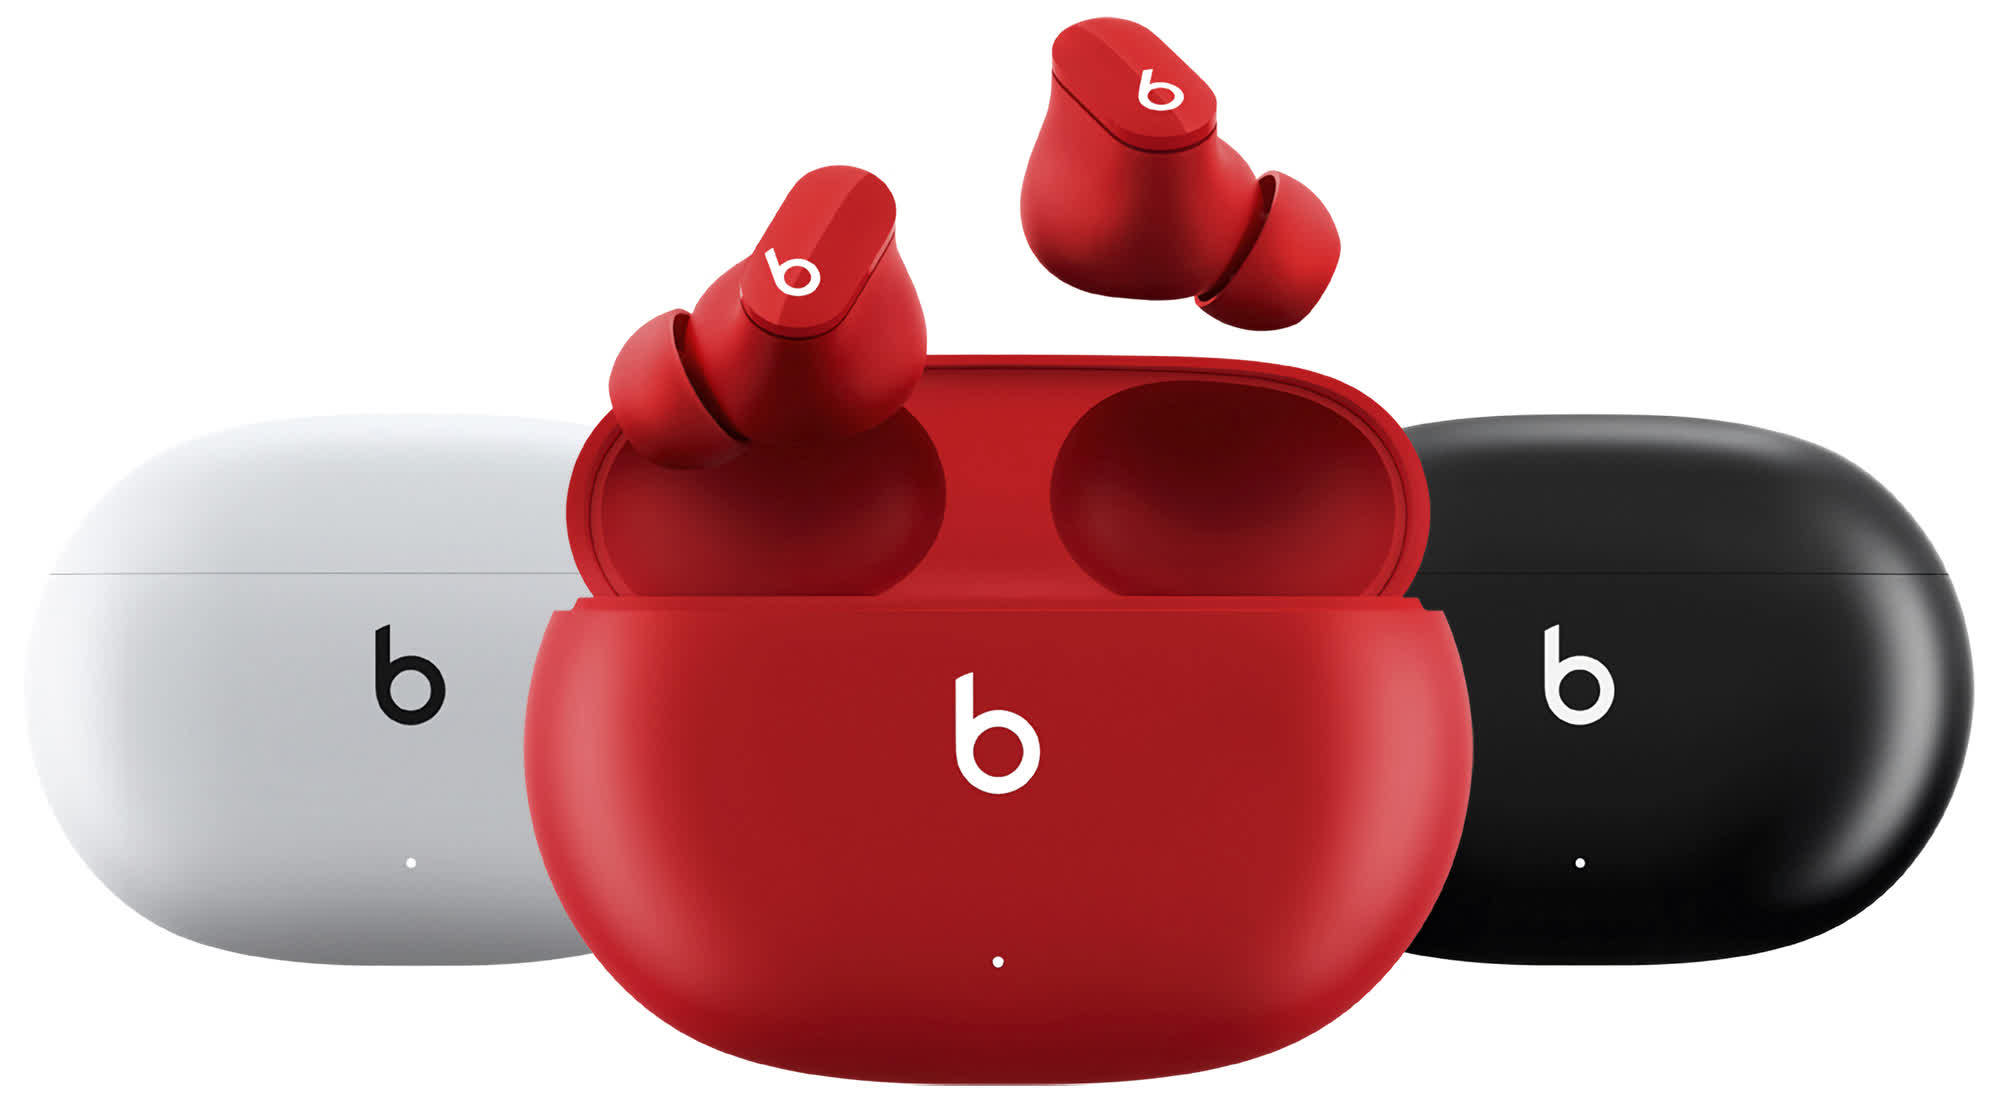 Beats announces $149.99 Studio Buds with active noise cancellation, support for Android and iOS